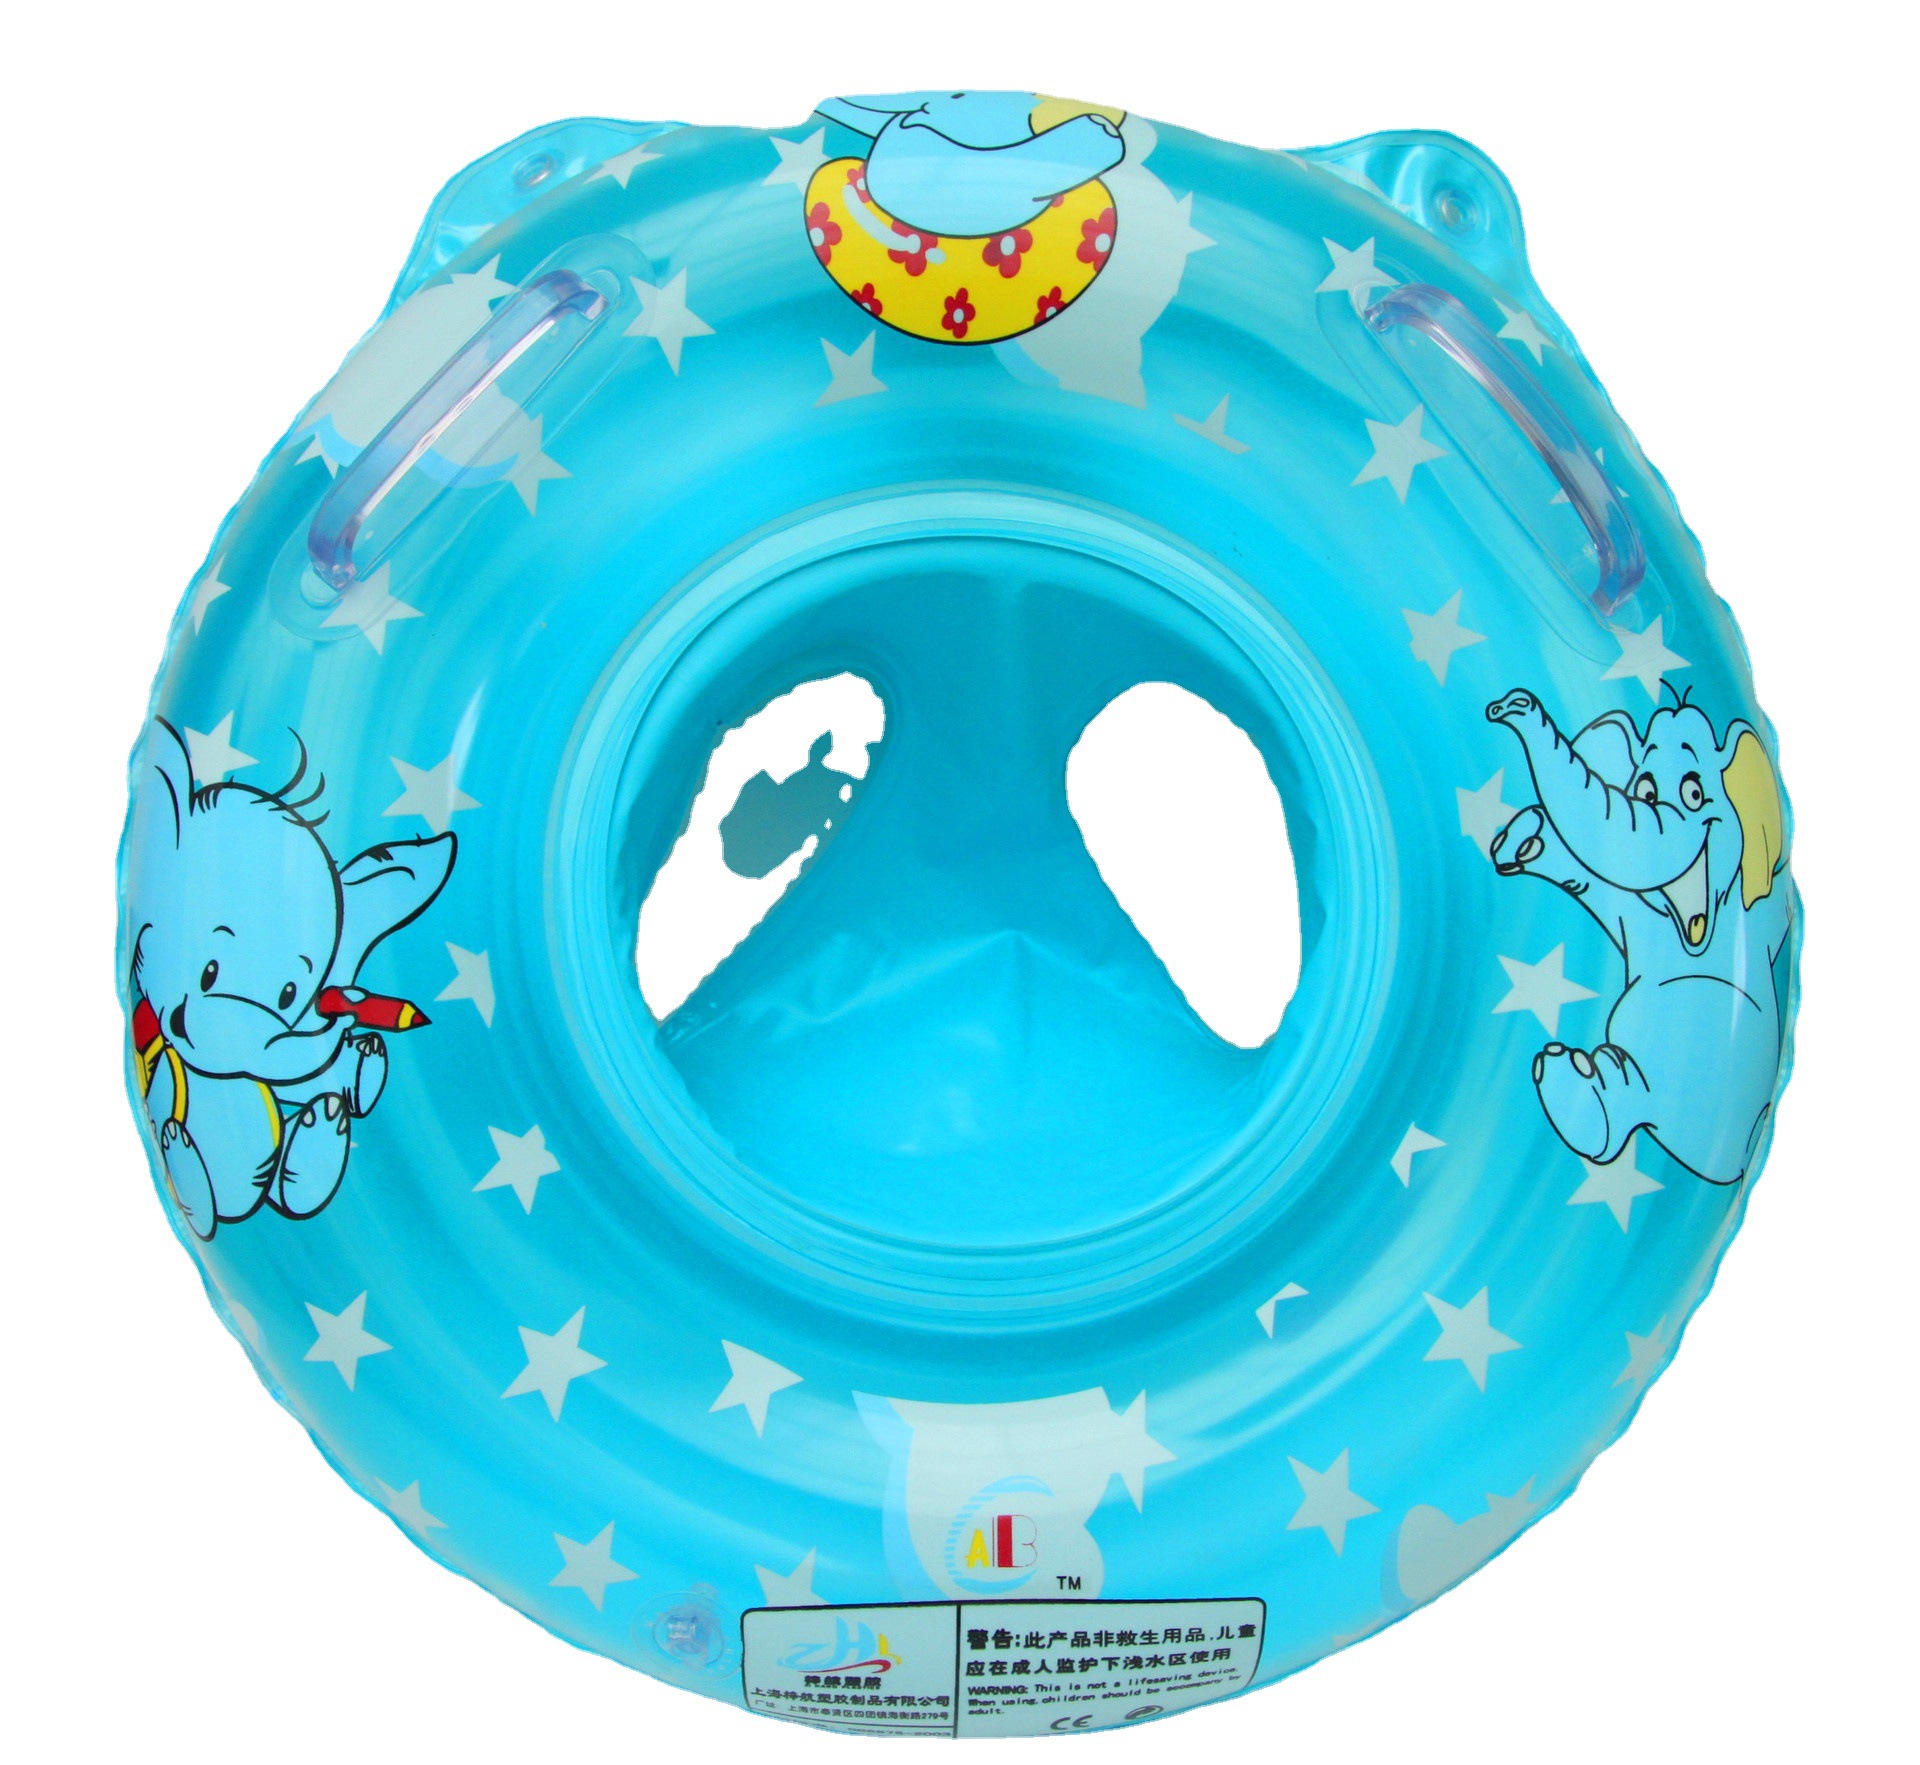 Elephant Pedestal Ring Infant Handle Swimming Ring Baby Underarm Swimming Ring Child Water Wing Children Boat Deepening Thickening Sitting Pocket